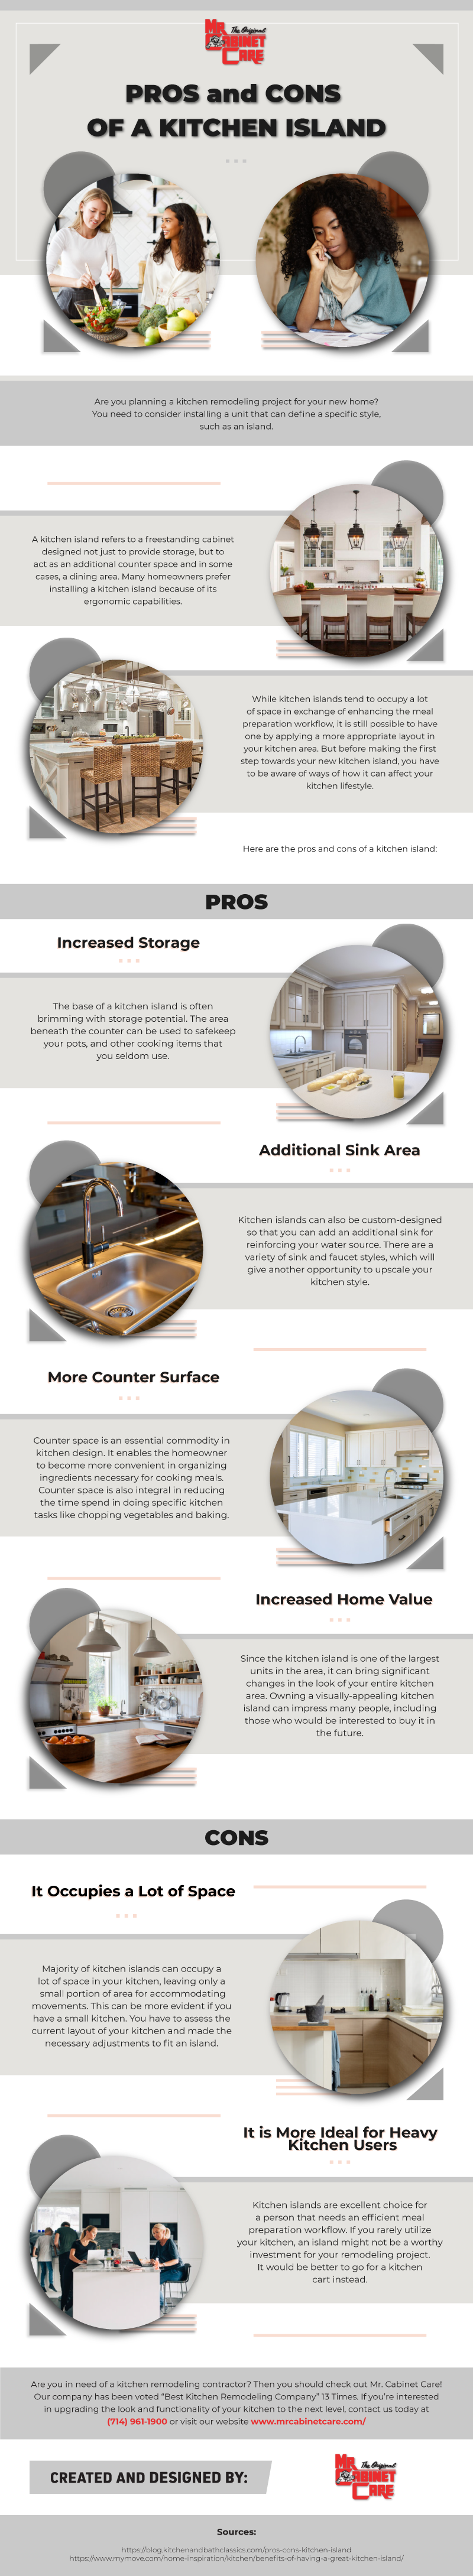 Pros and Cons of a Kitchen Island Infographic